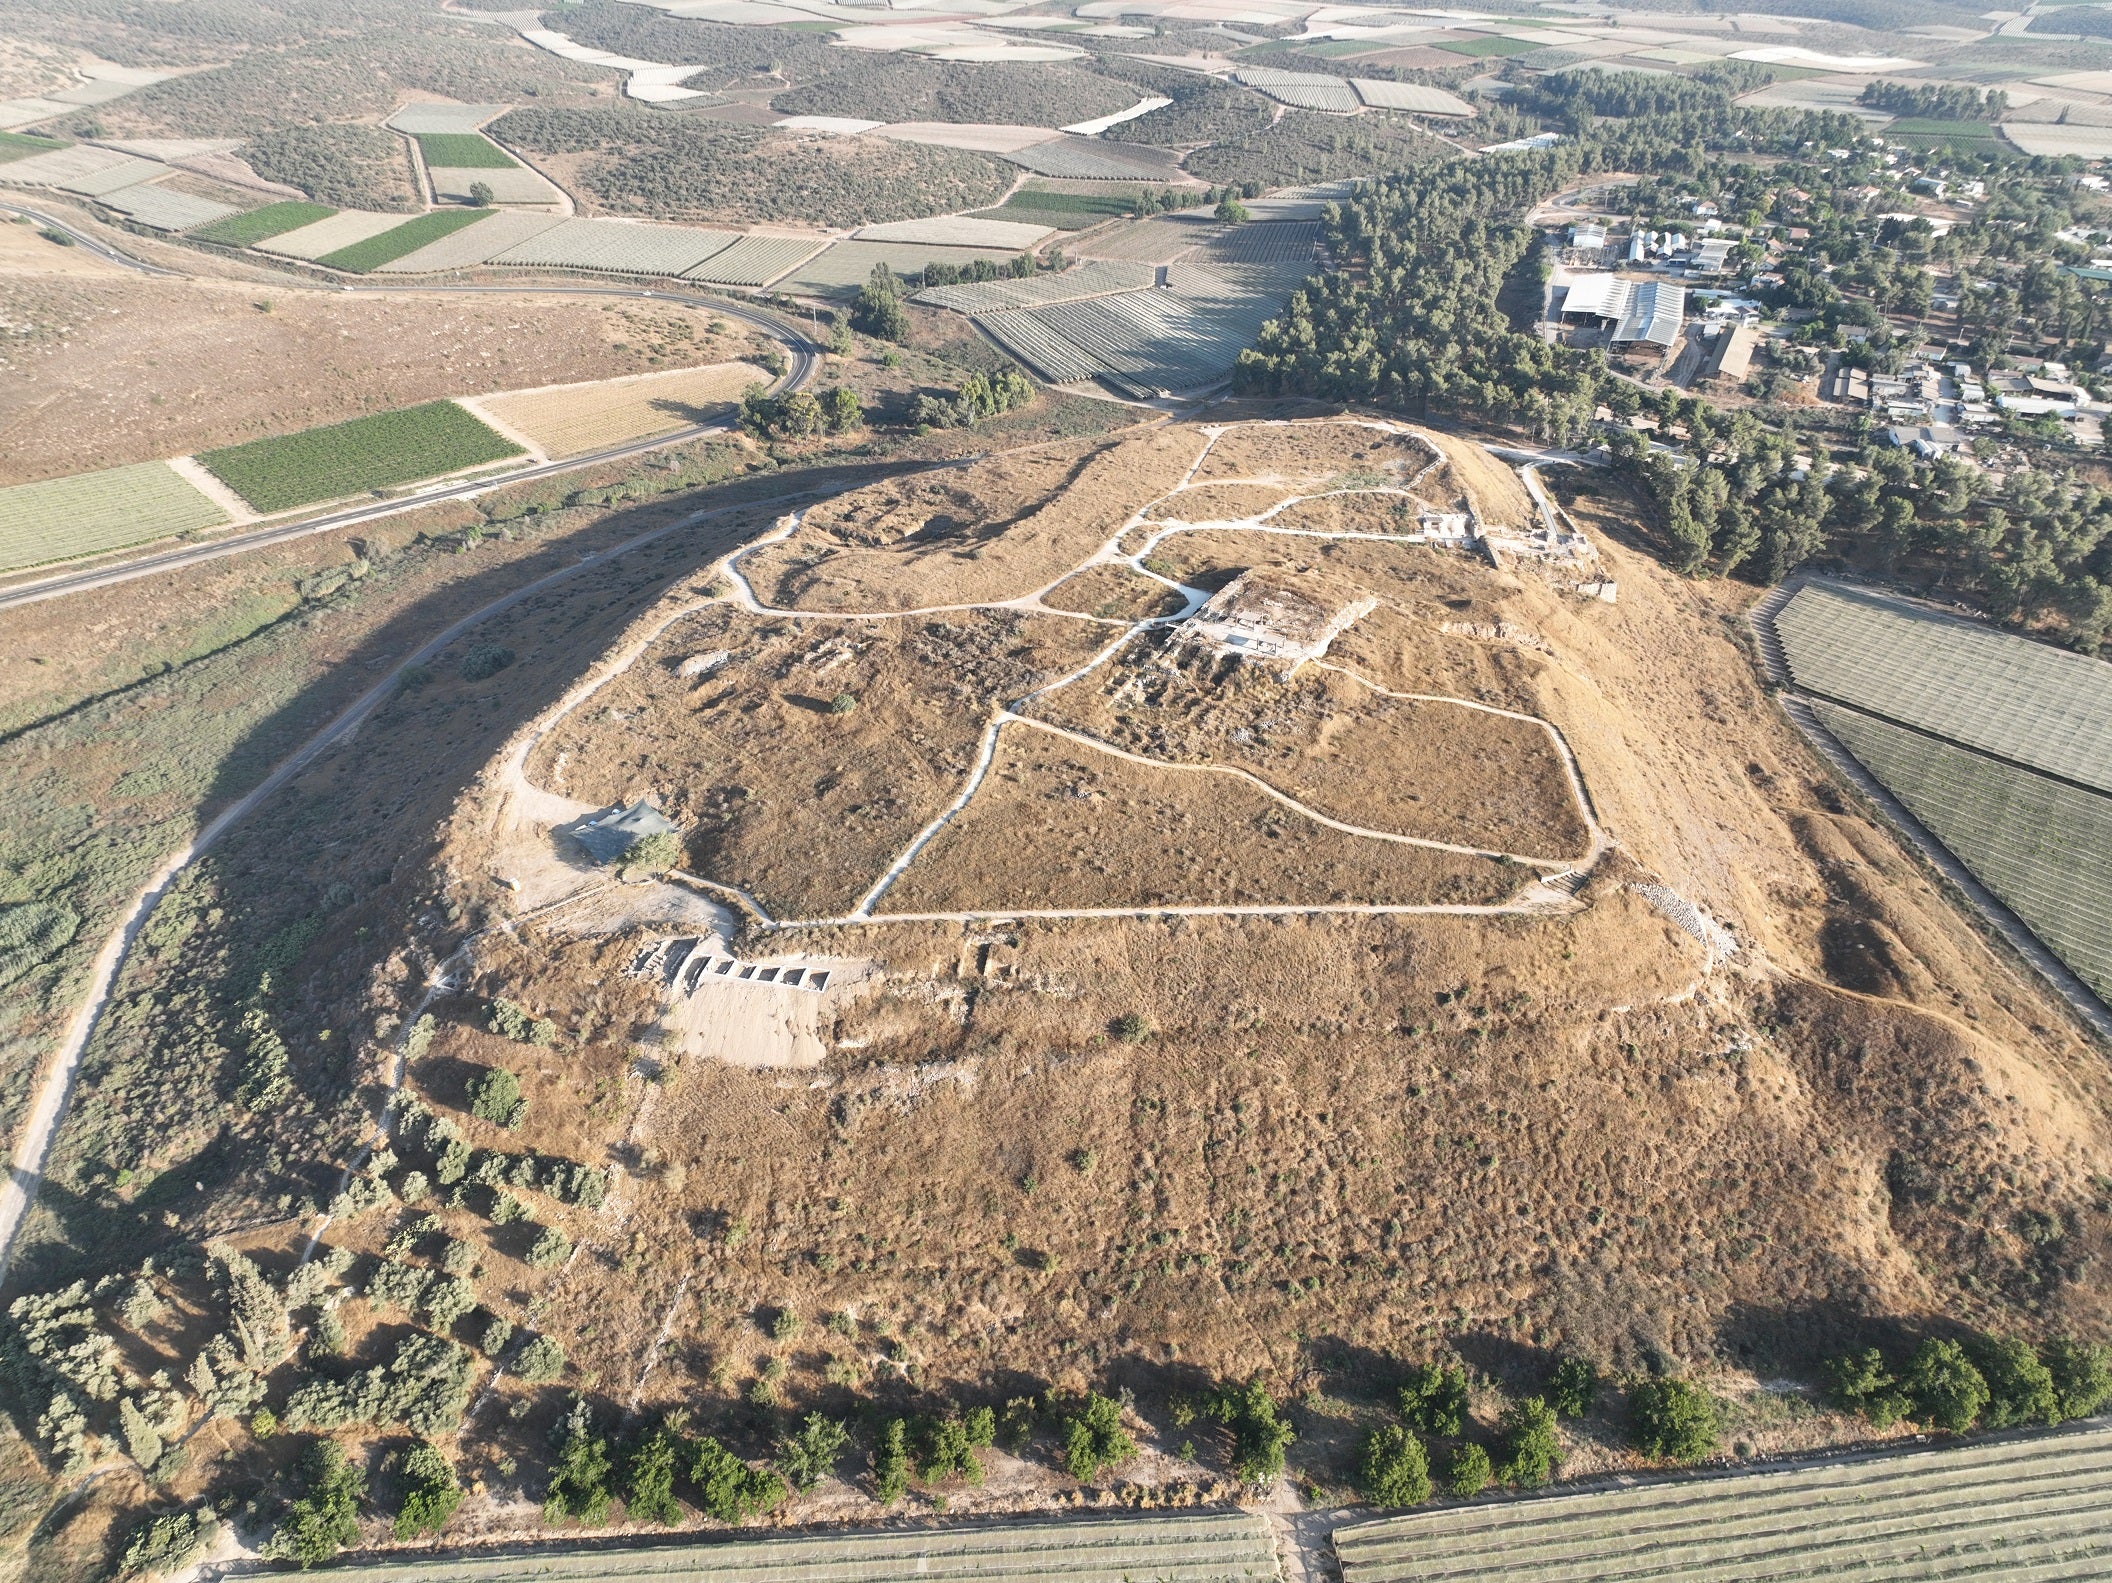 The site of Tel Lachish, where the comb was found. (Photo: Emil Aladjem)